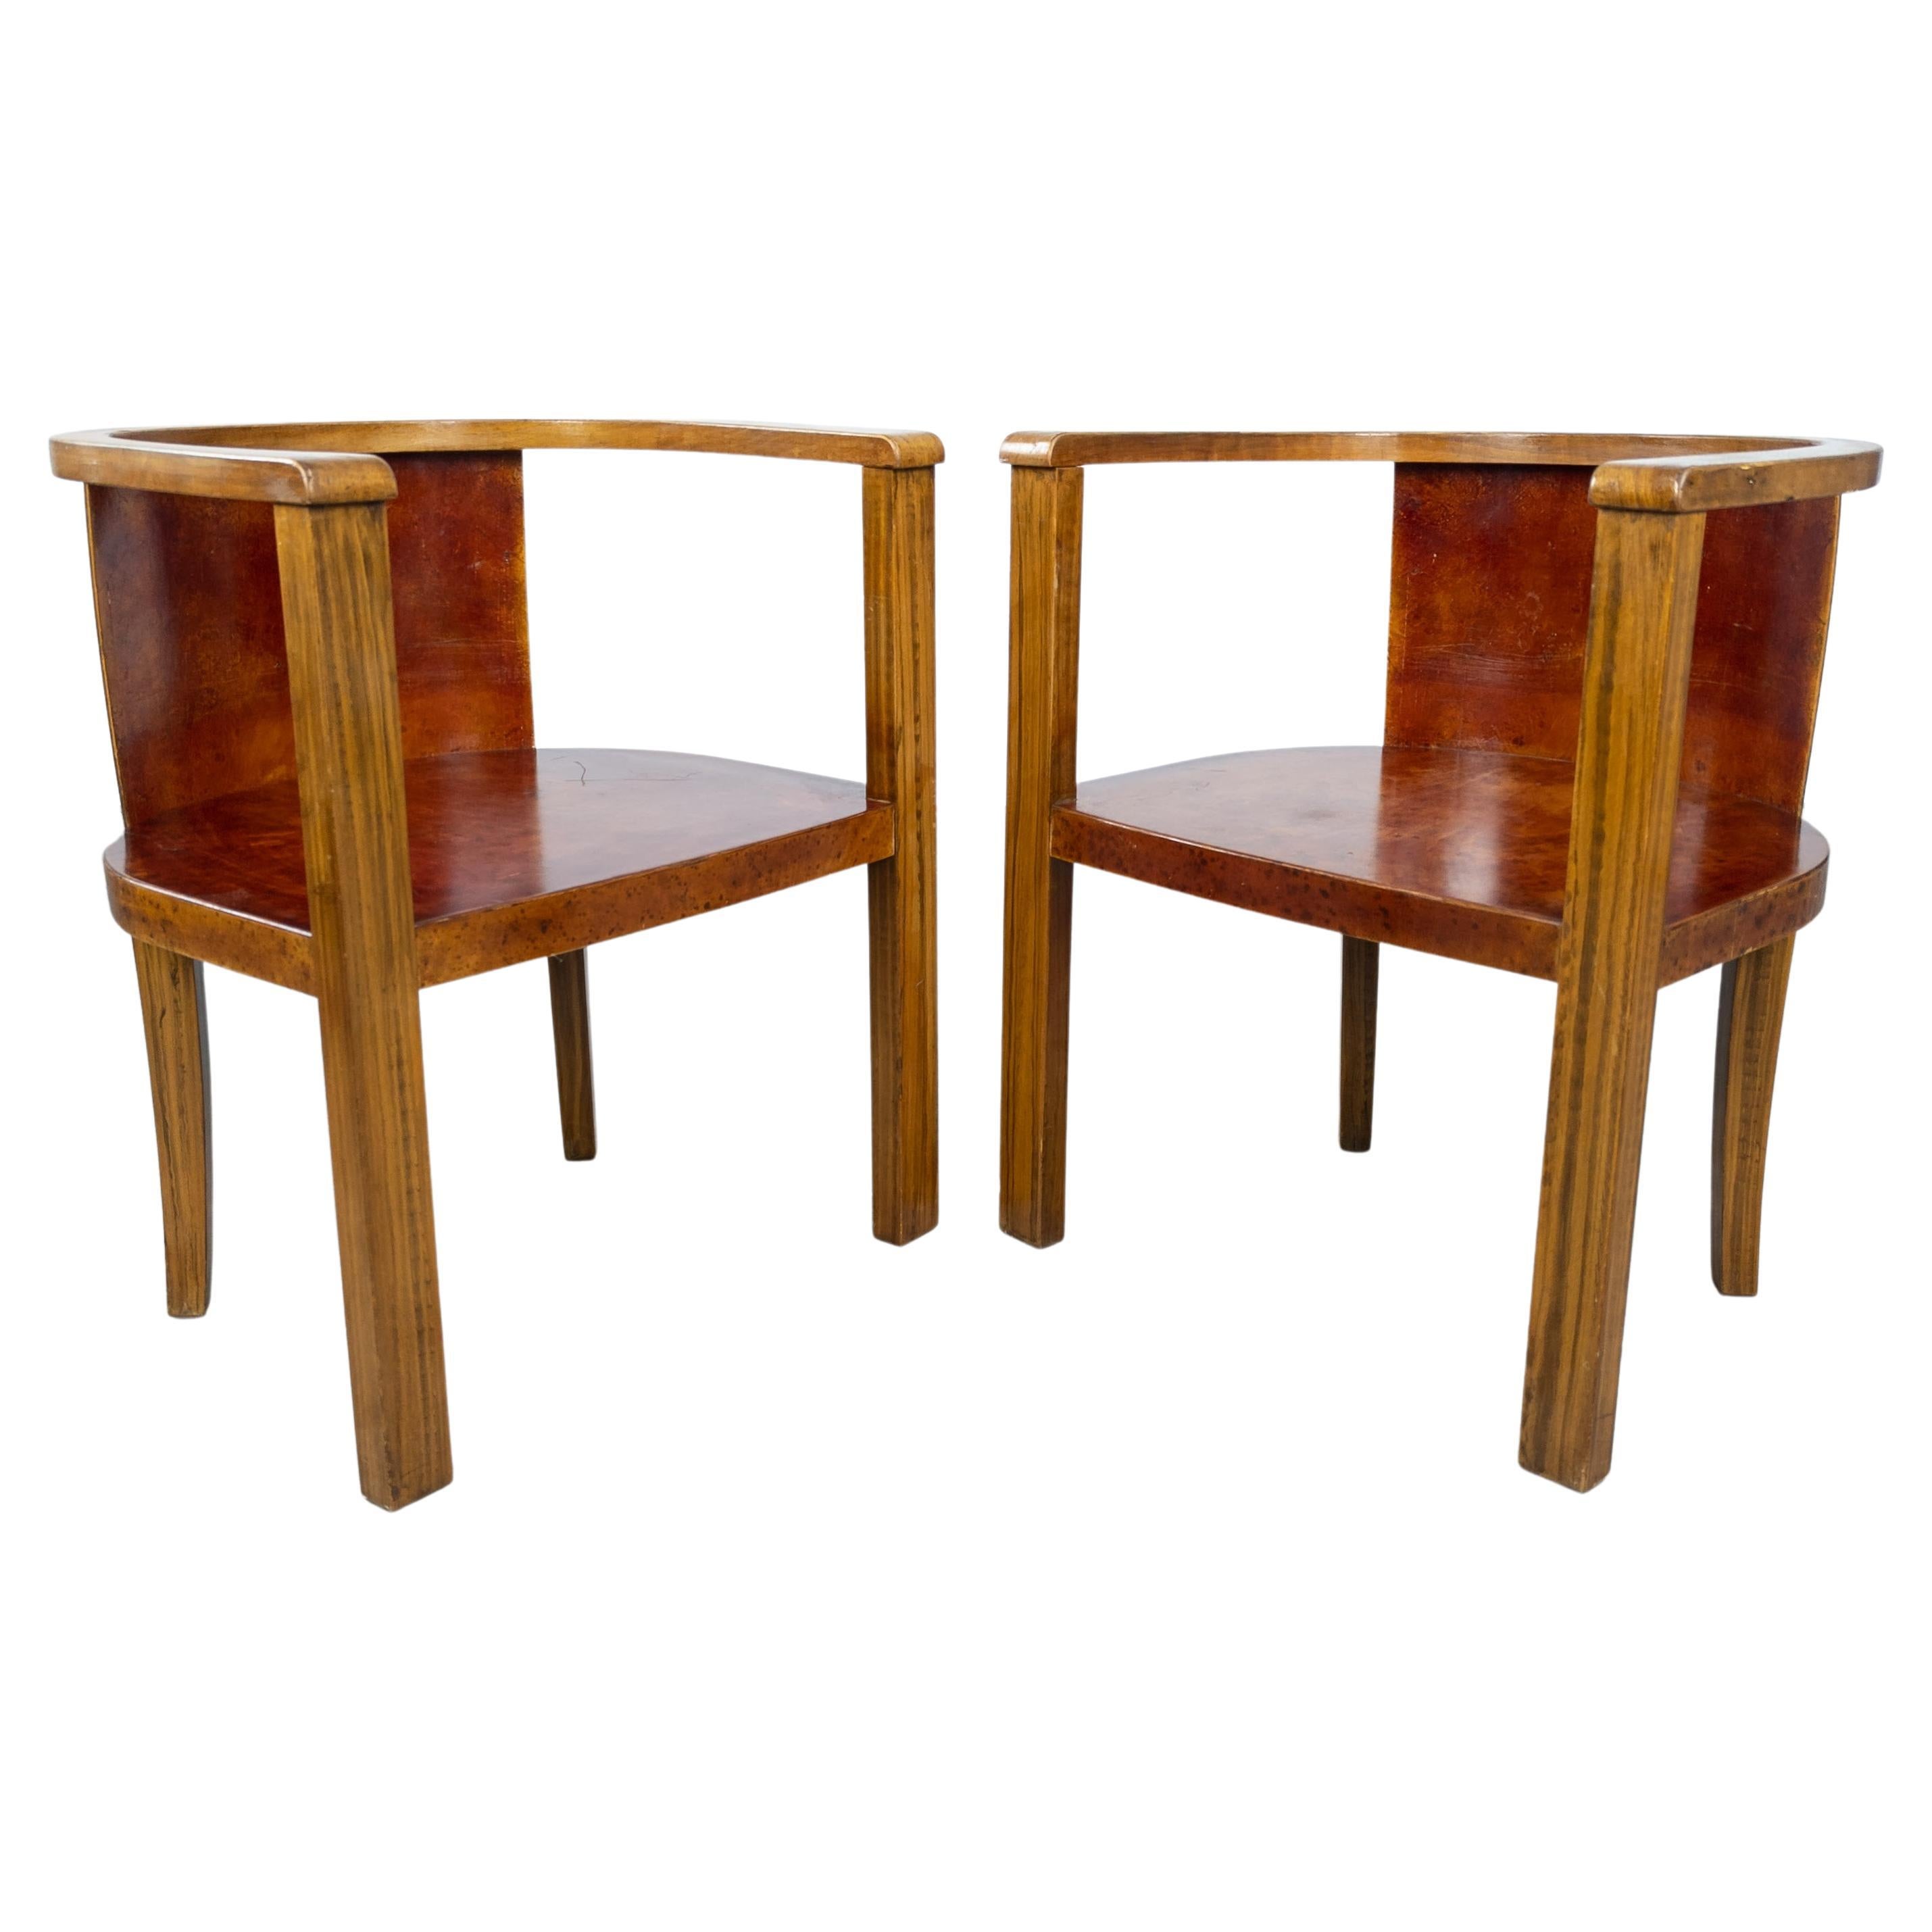 Pair of 1930's German Modernist Barrel Chairs